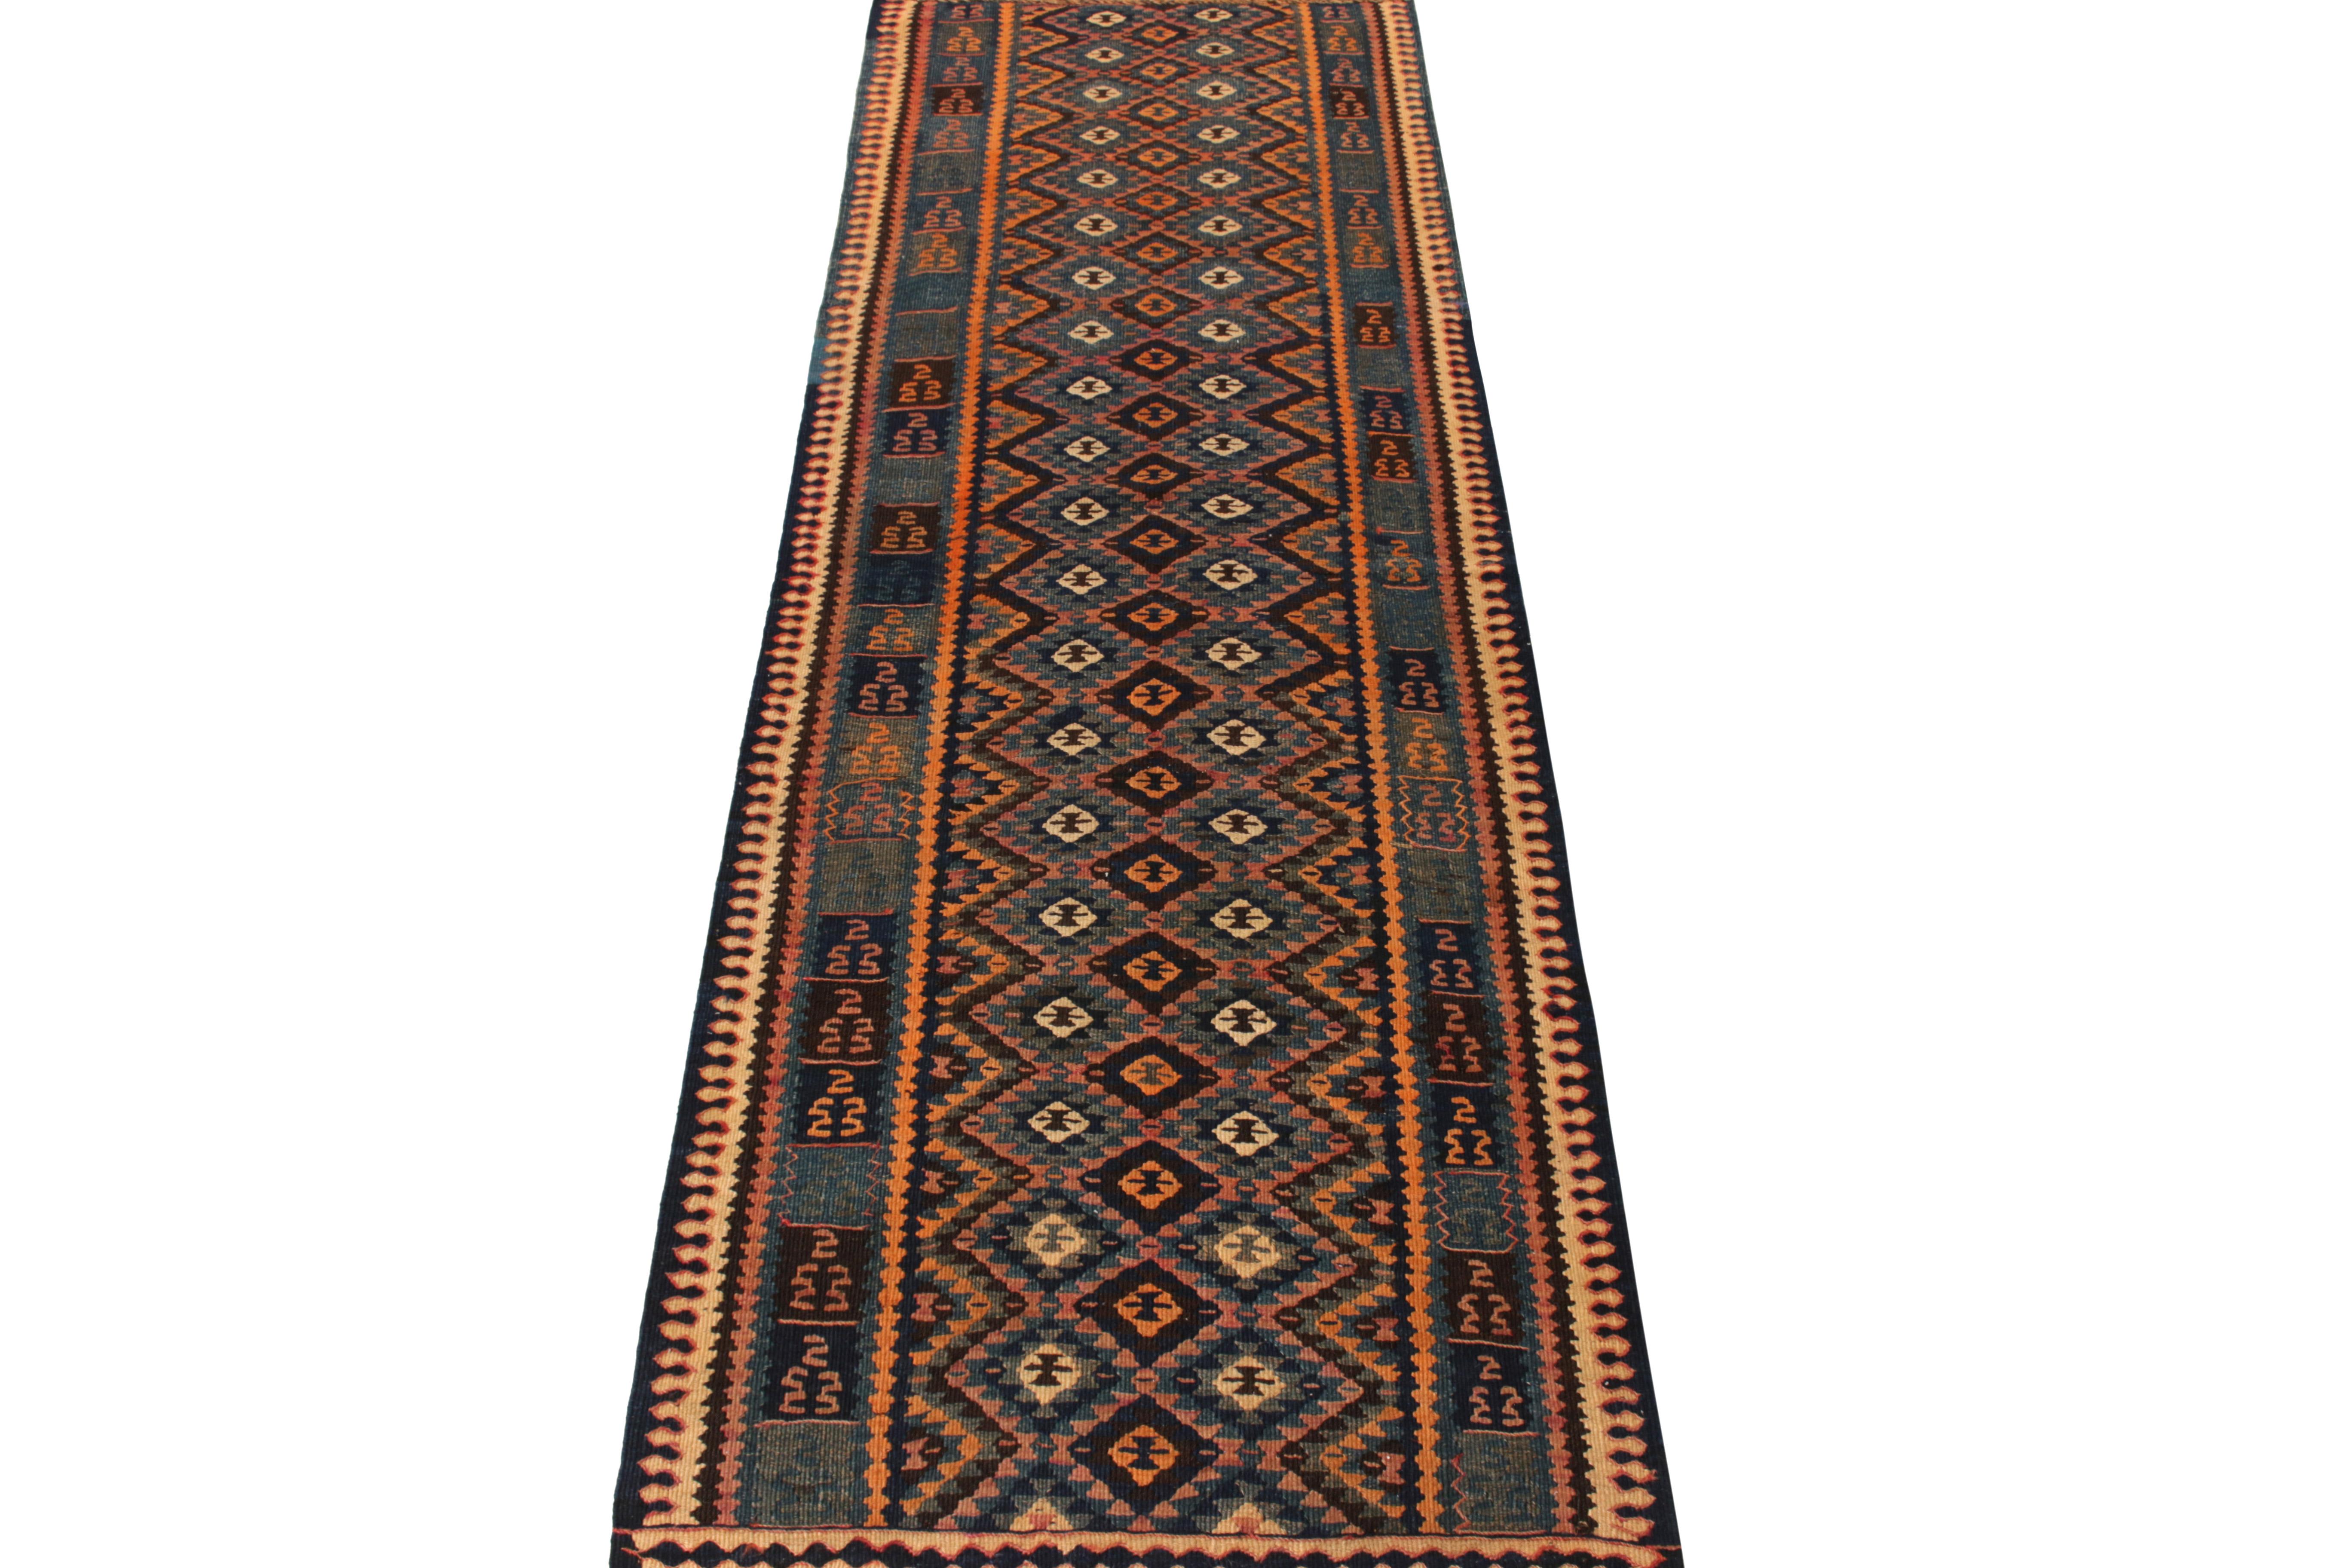 A 3 x 10 handwoven vintage Kilim runner from Turkey circa 1950-1960, amongst Rug & Kilim’s fine selections of Classic flatweaves. The piece displays a montage of symmetric chevrons, diamond patterns and nomadic motifs in a rare colorway of gold,